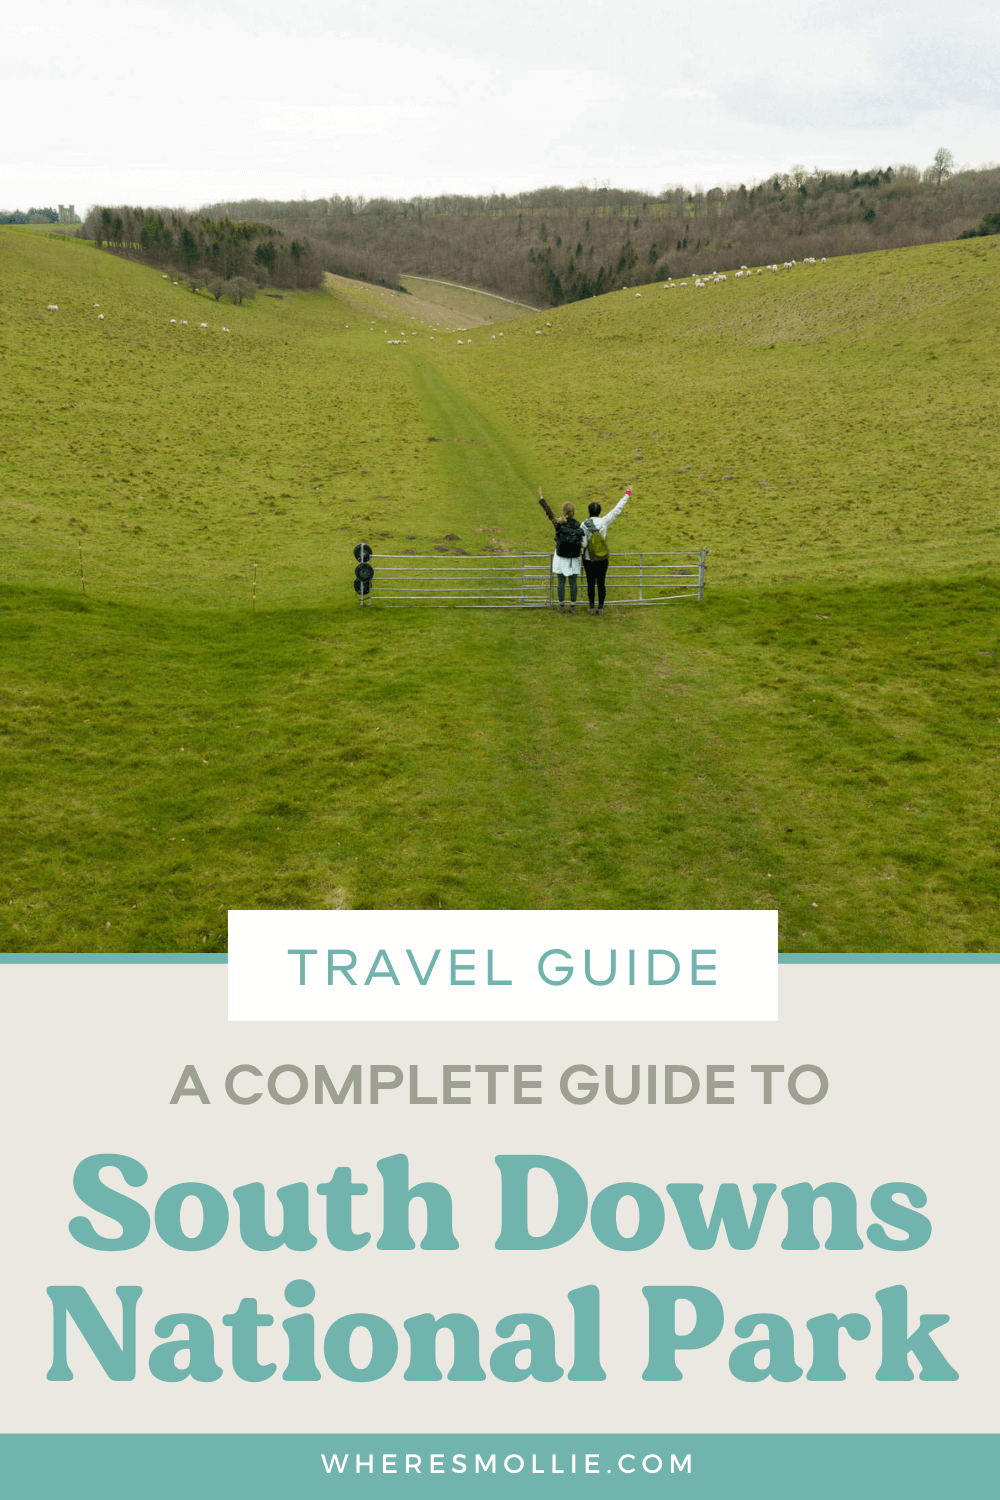 A complete guide to the South Downs National Park, England